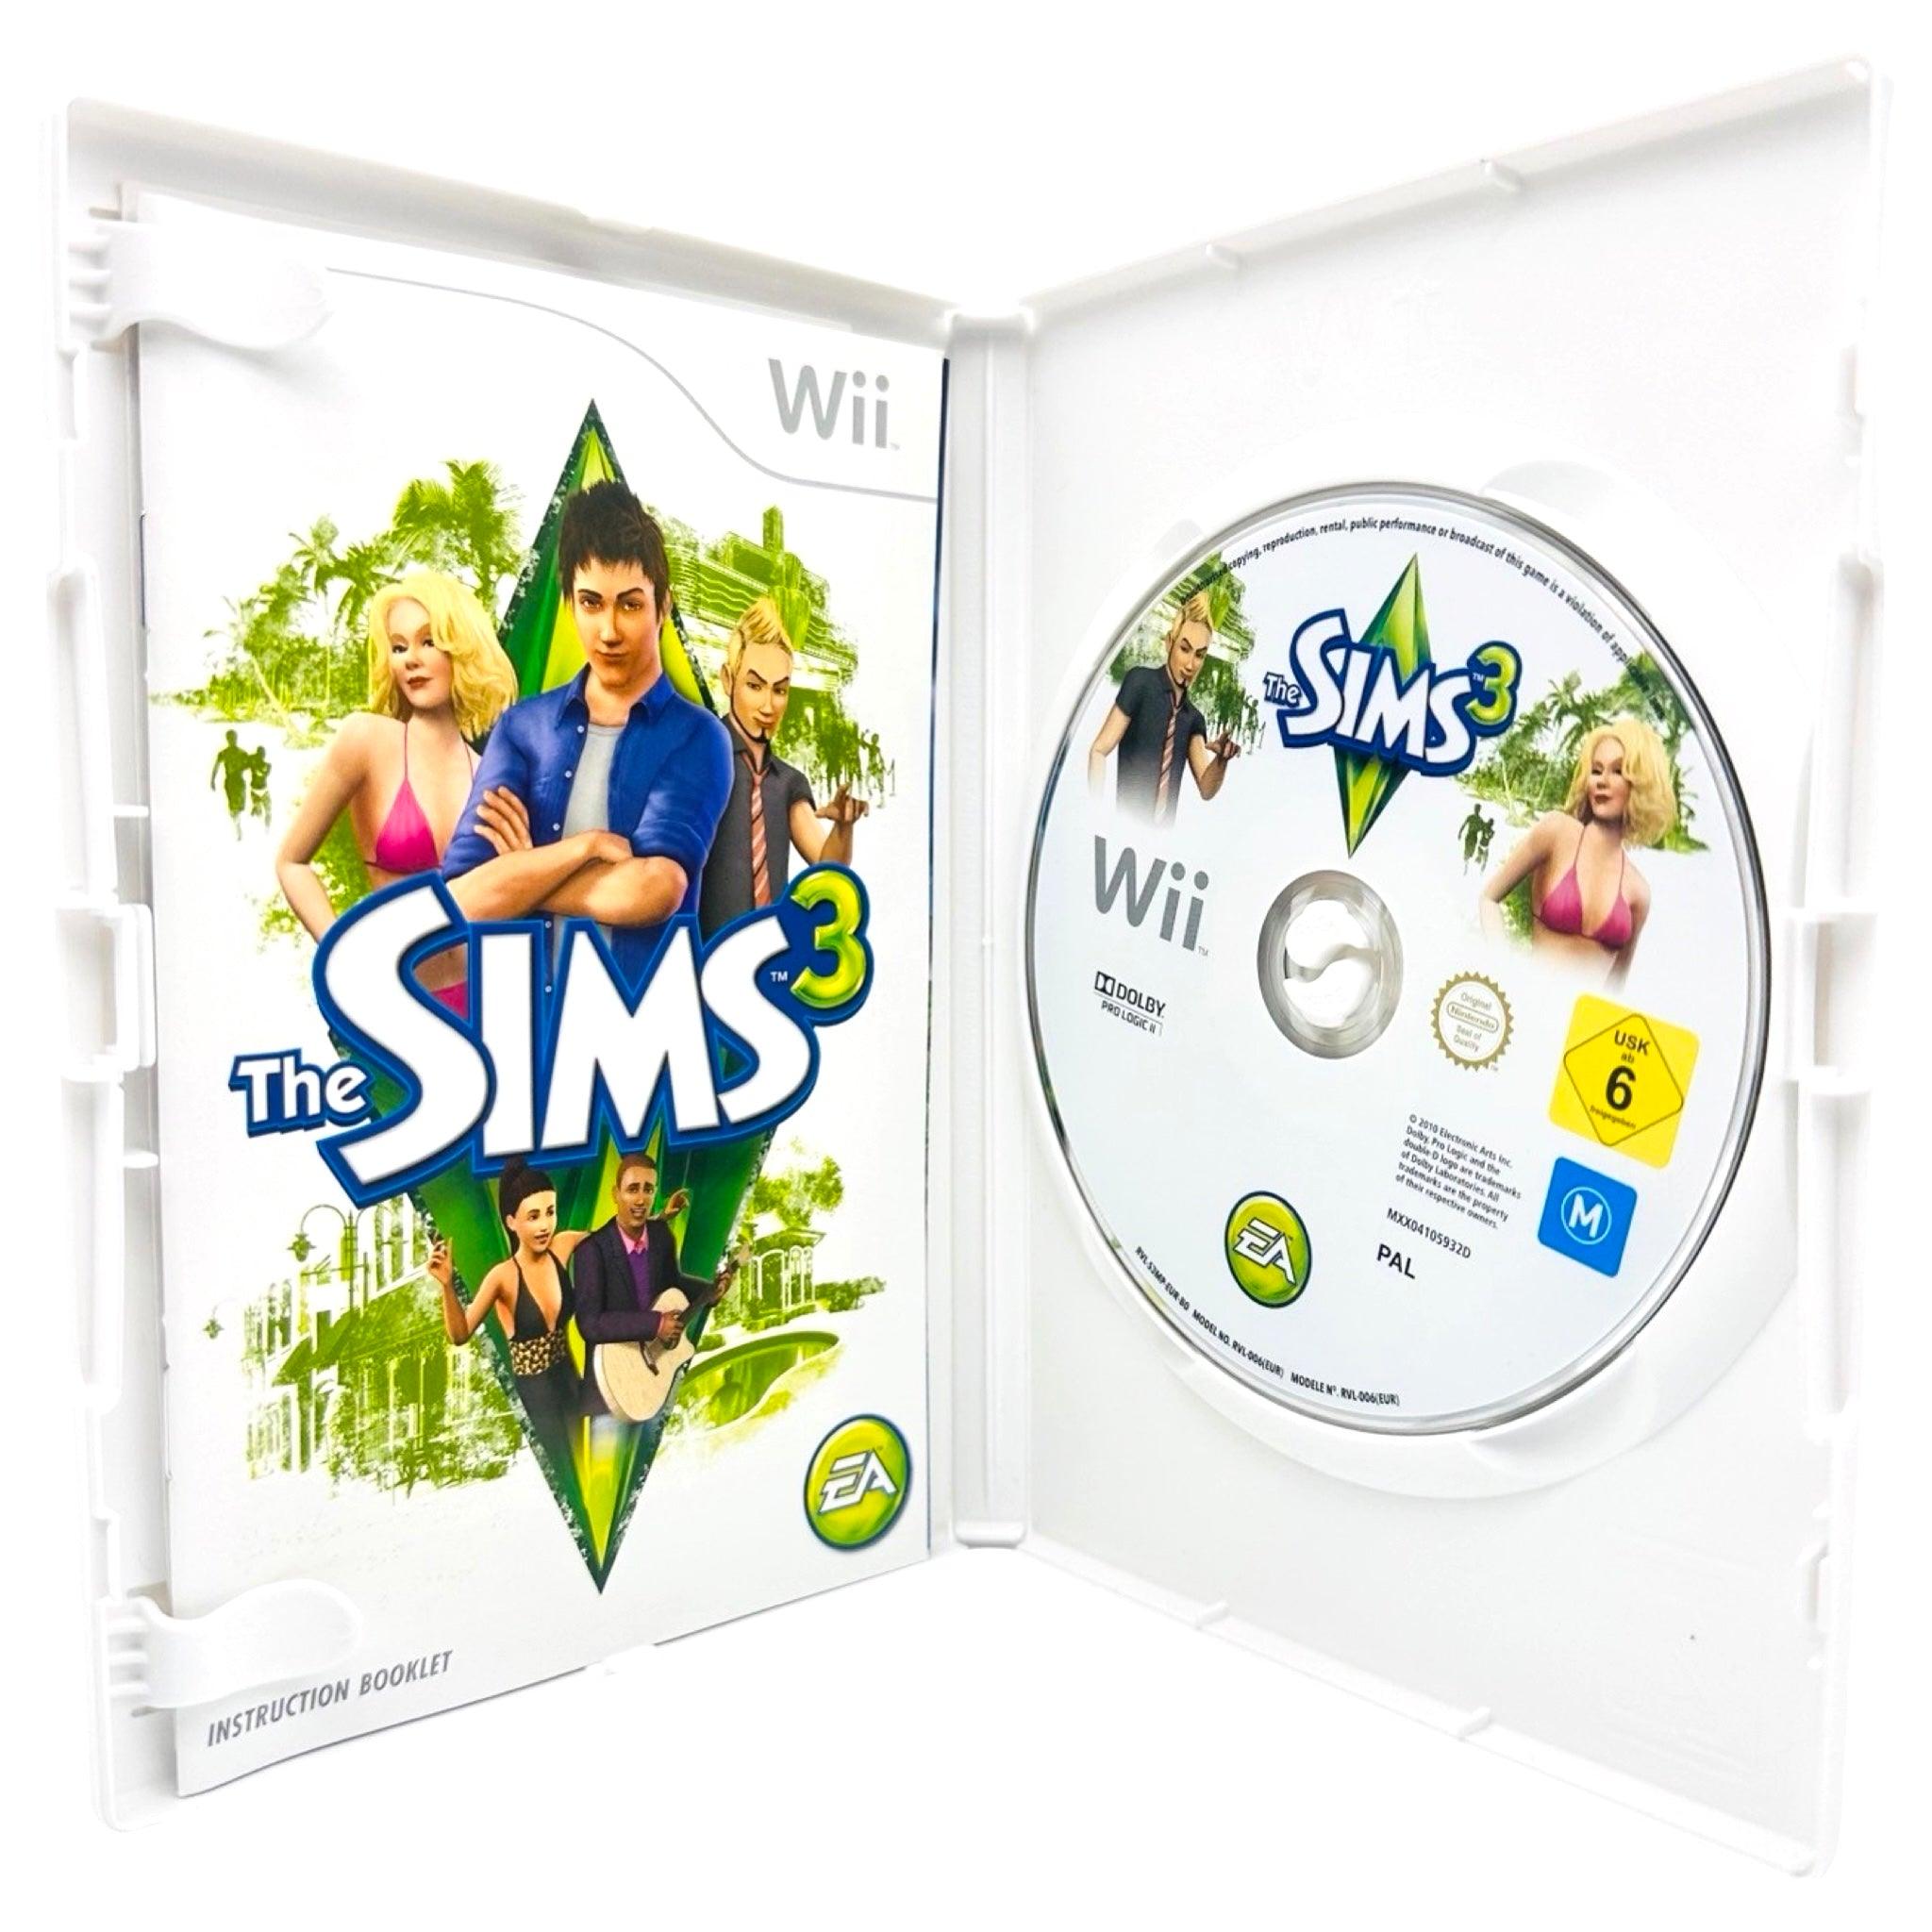 Wii: The Sims 3 - RetroGaming.no